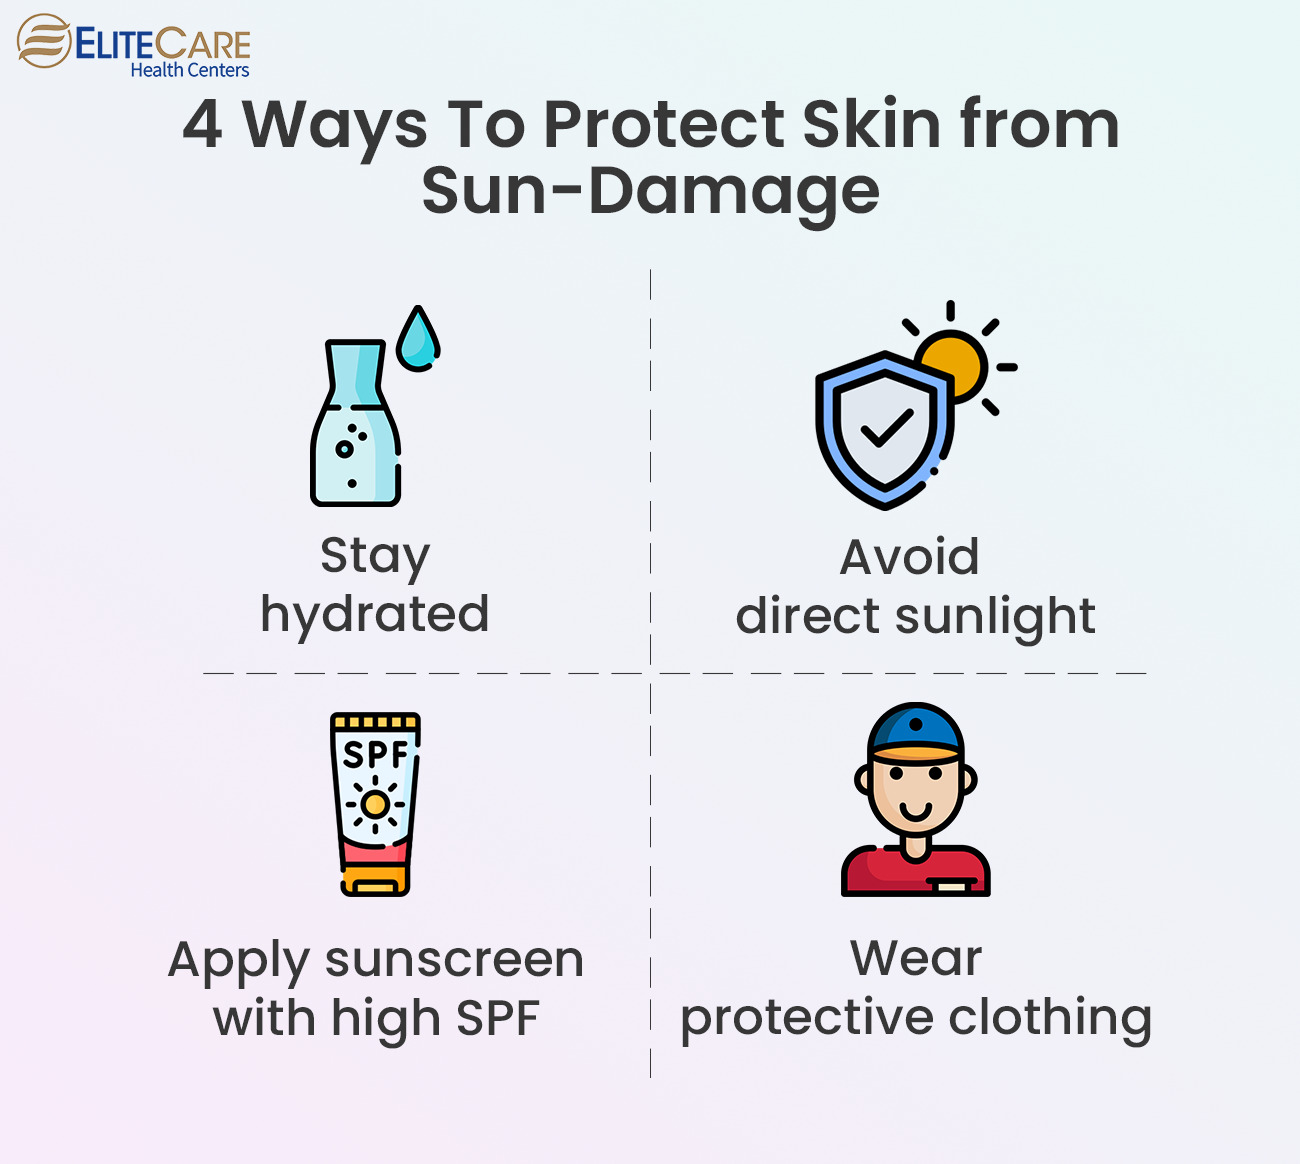 4 Ways to Protect Skin from Sun-Damage